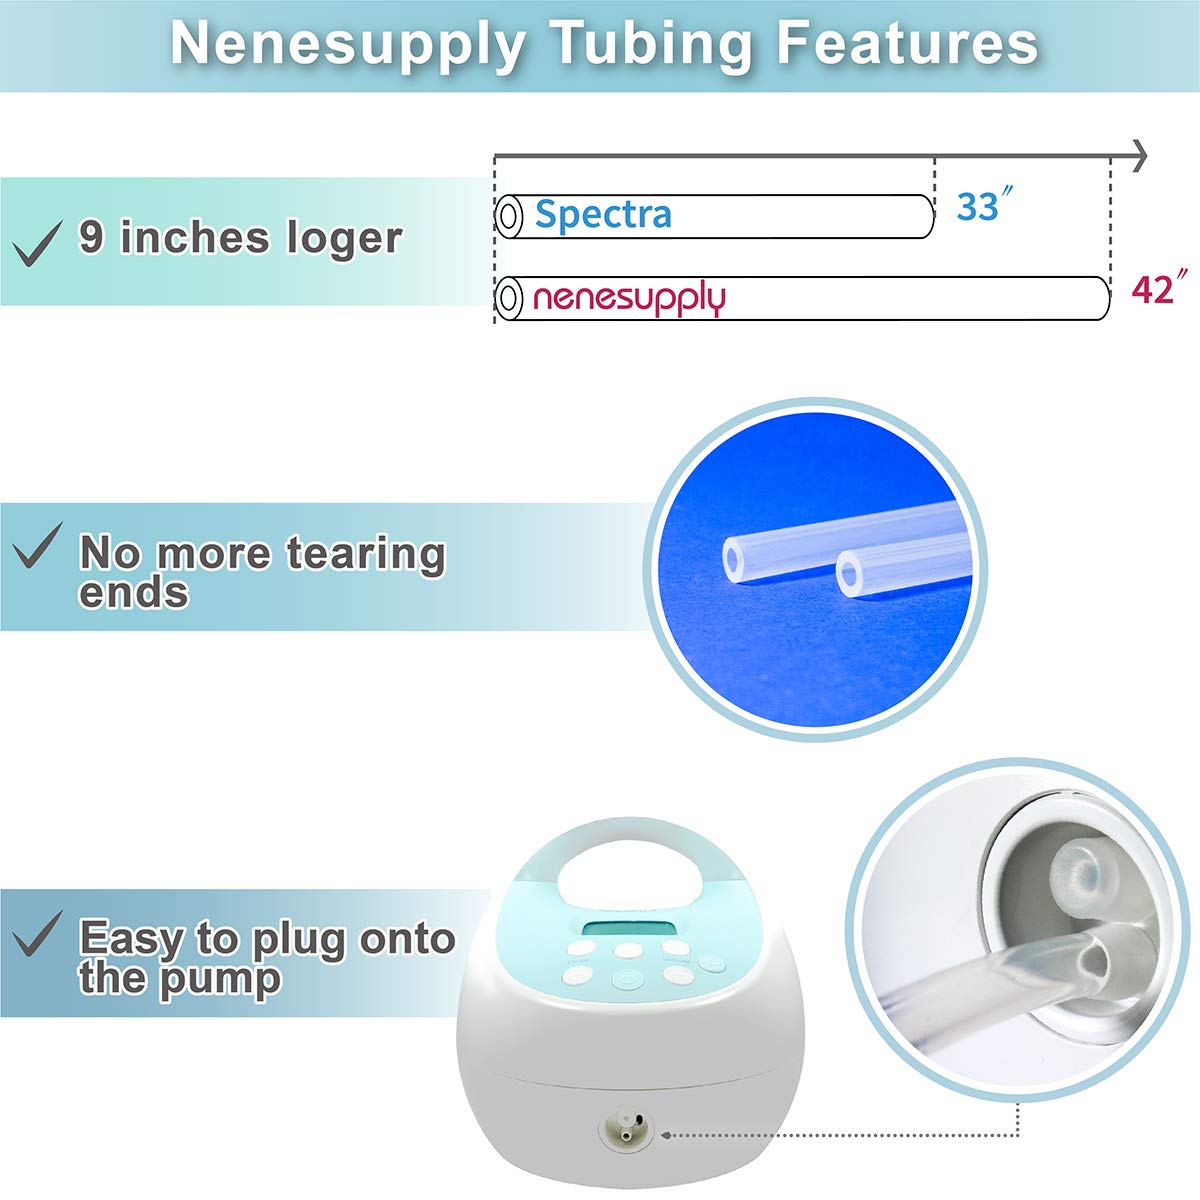 Nenesupply Tubing Compatible with Spectra S2 Spectra S1 Spectra 9 Plus Replace Spectra Tubing Ameda Tubing Avent Tubing Replace Spectra Pump Parts Replace Spectra S2 Accessories - (For 12 piece(s))